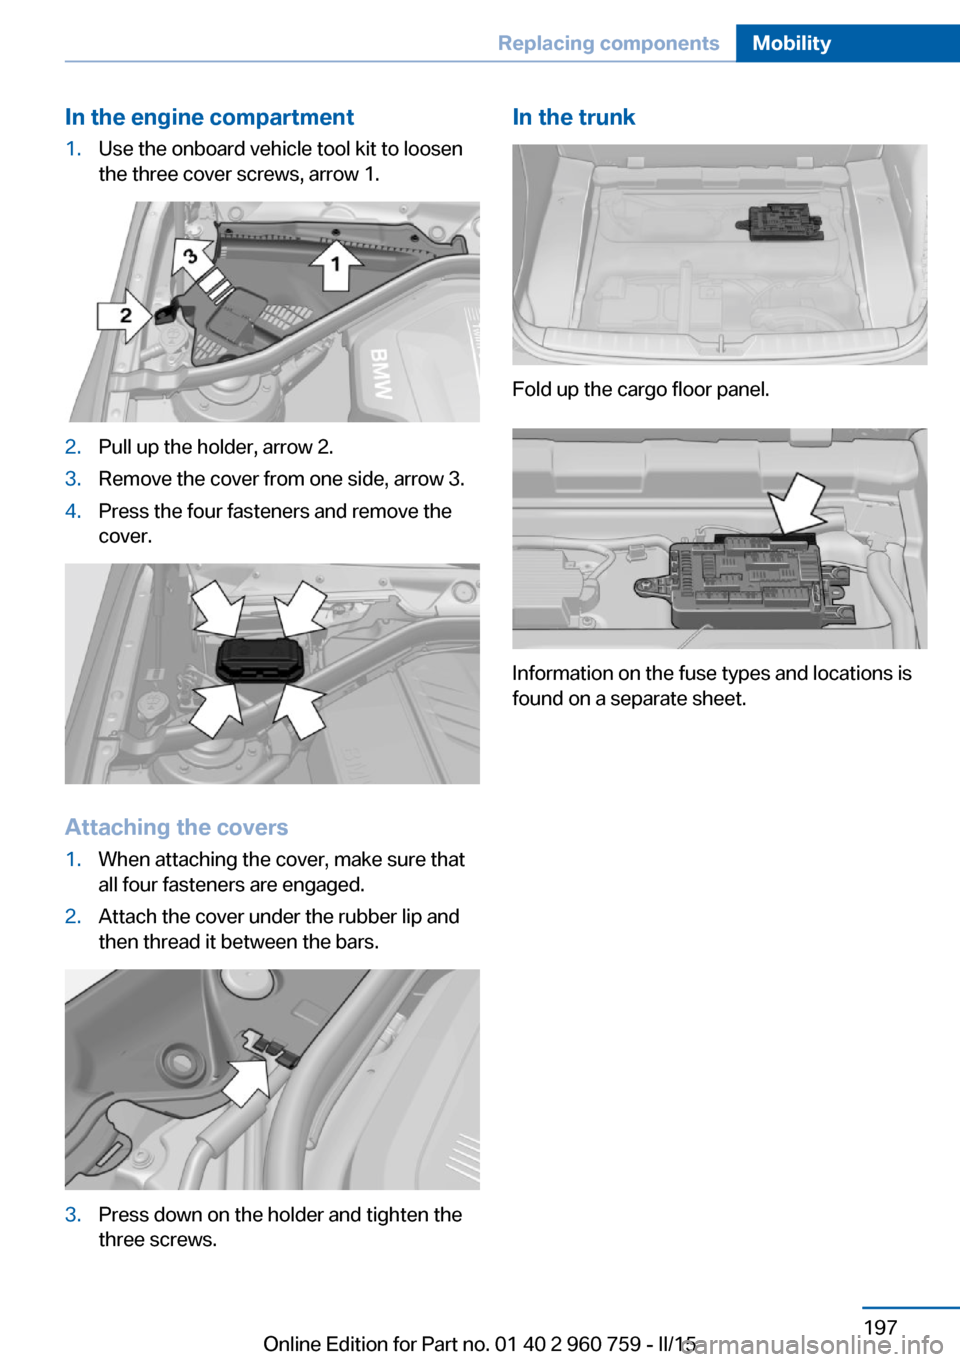 BMW M3 2015 F80 Owners Manual In the engine compartment1.Use the onboard vehicle tool kit to loosen
the three cover screws, arrow 1.2.Pull up the holder, arrow 2.3.Remove the cover from one side, arrow 3.4.Press the four fasteners